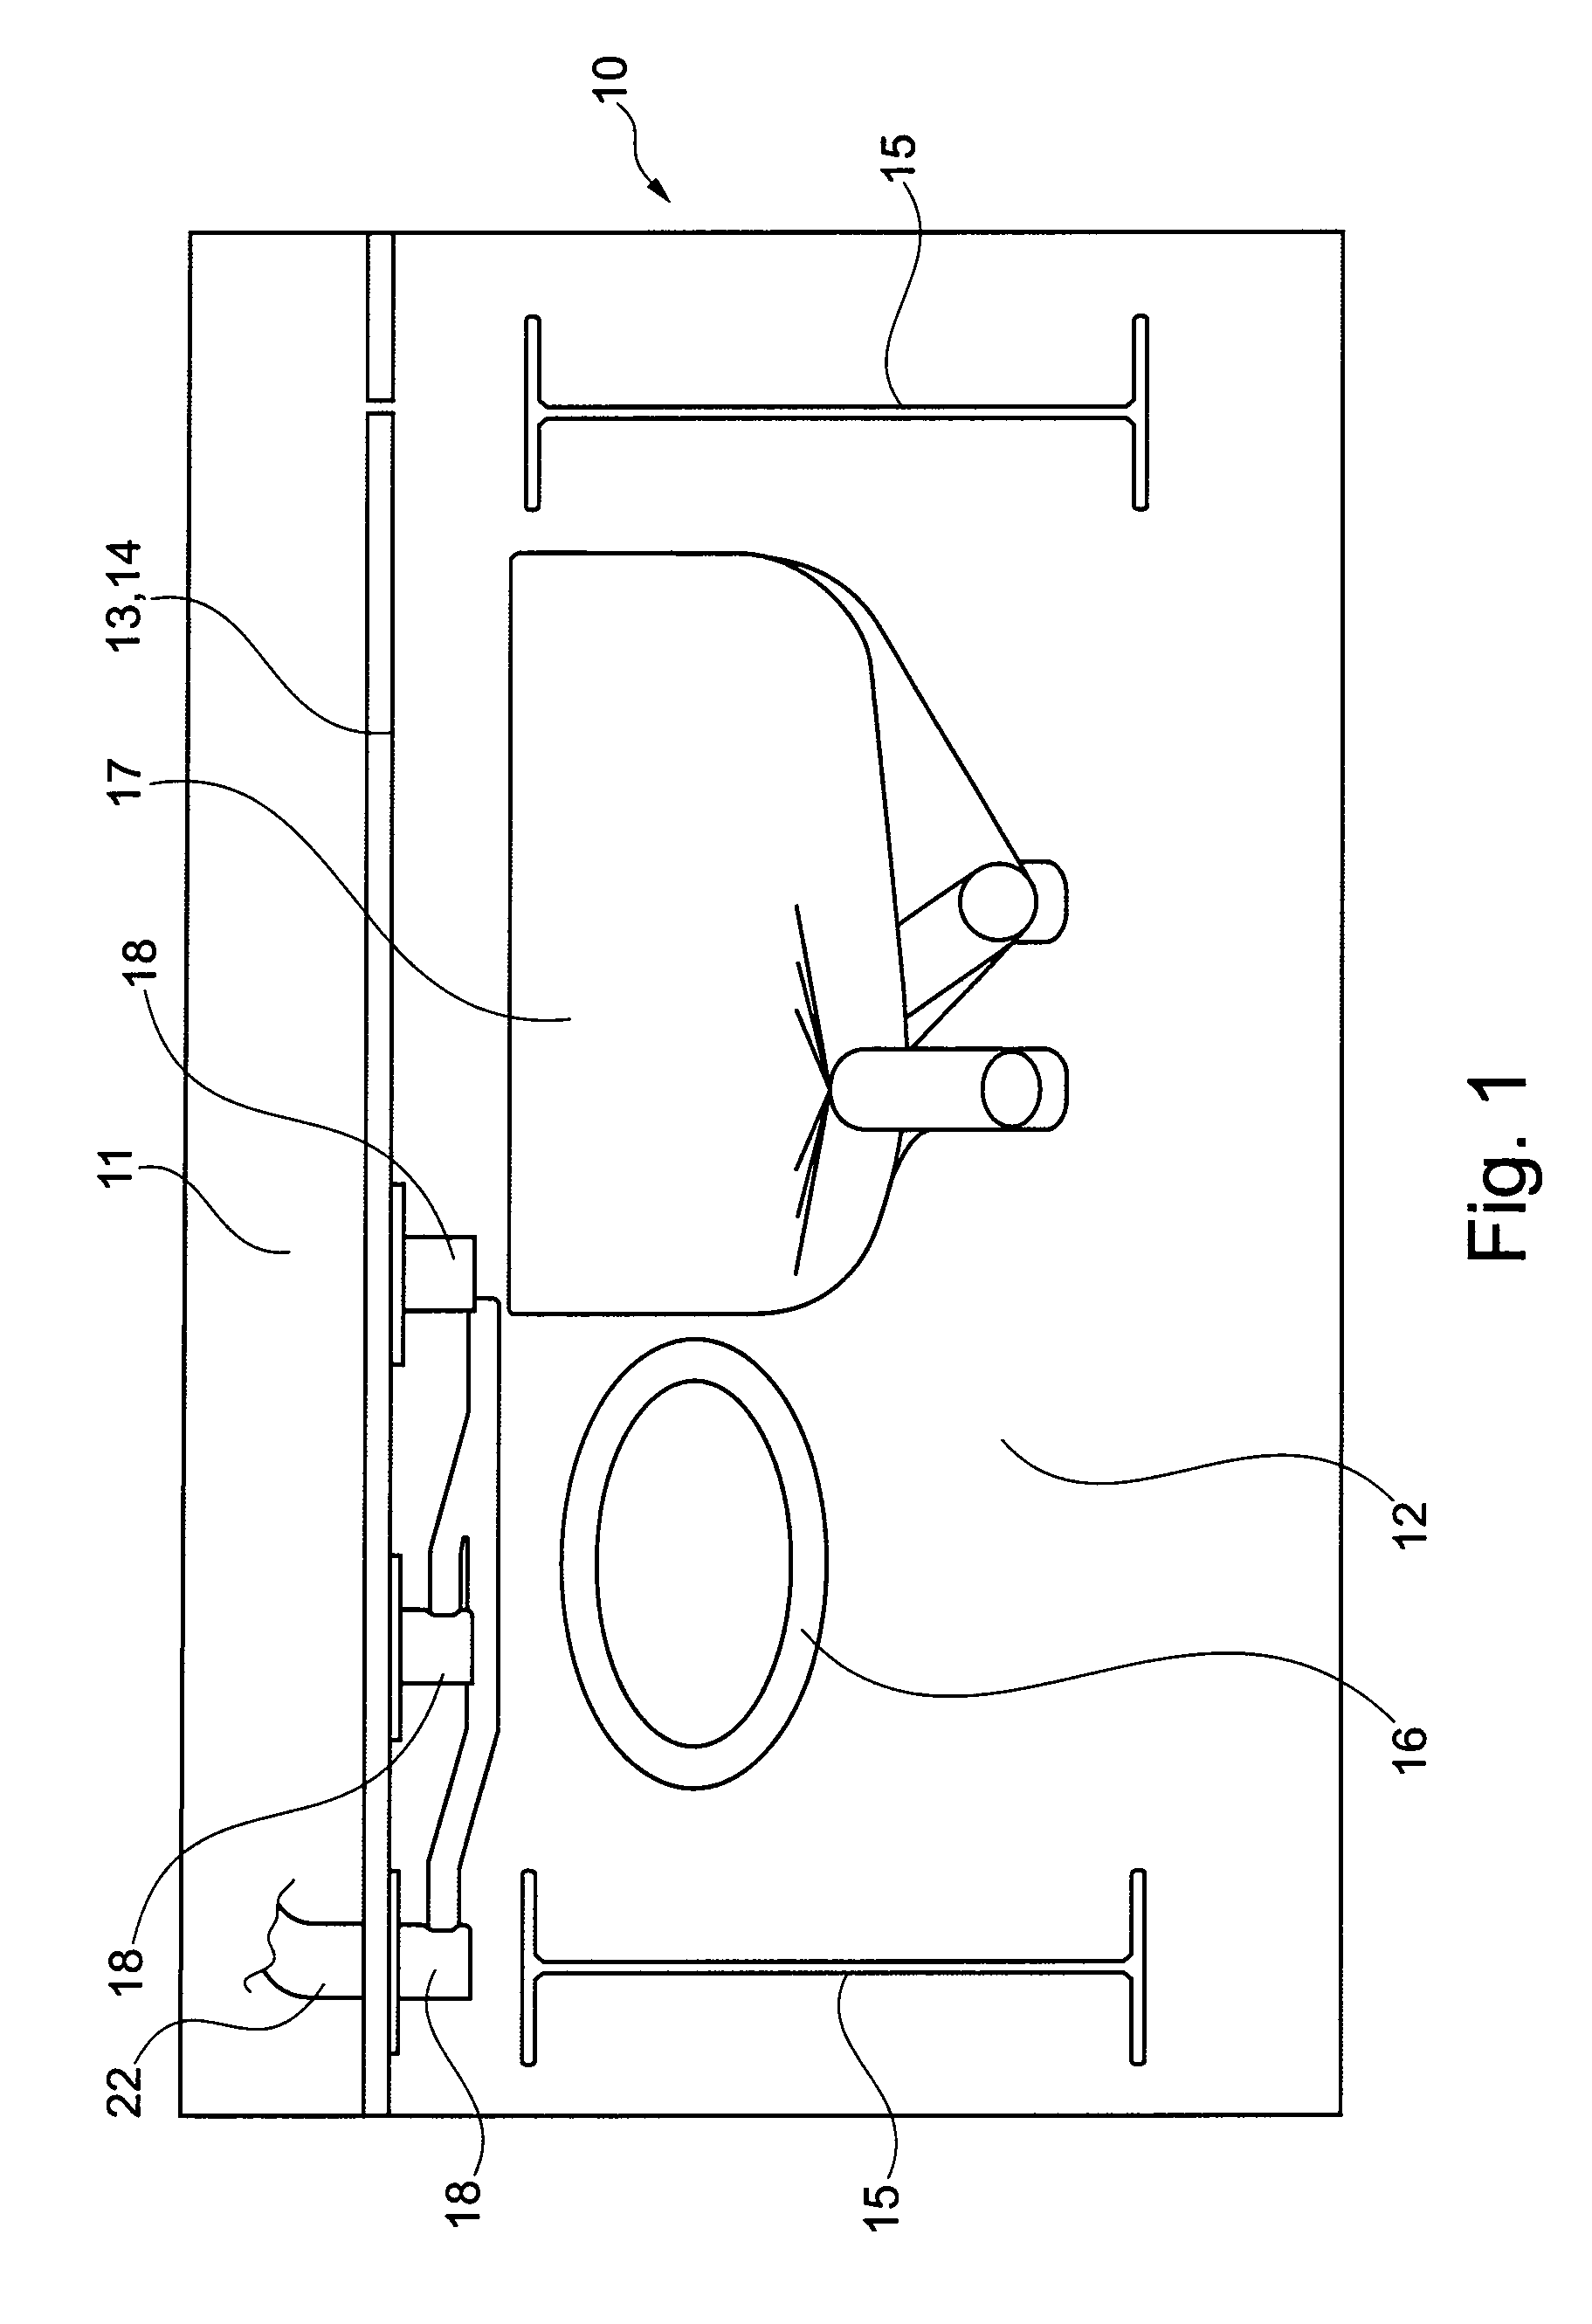 Aircraft with connection element for connecting a conduit system to cooling aggregates in aircraft cabins